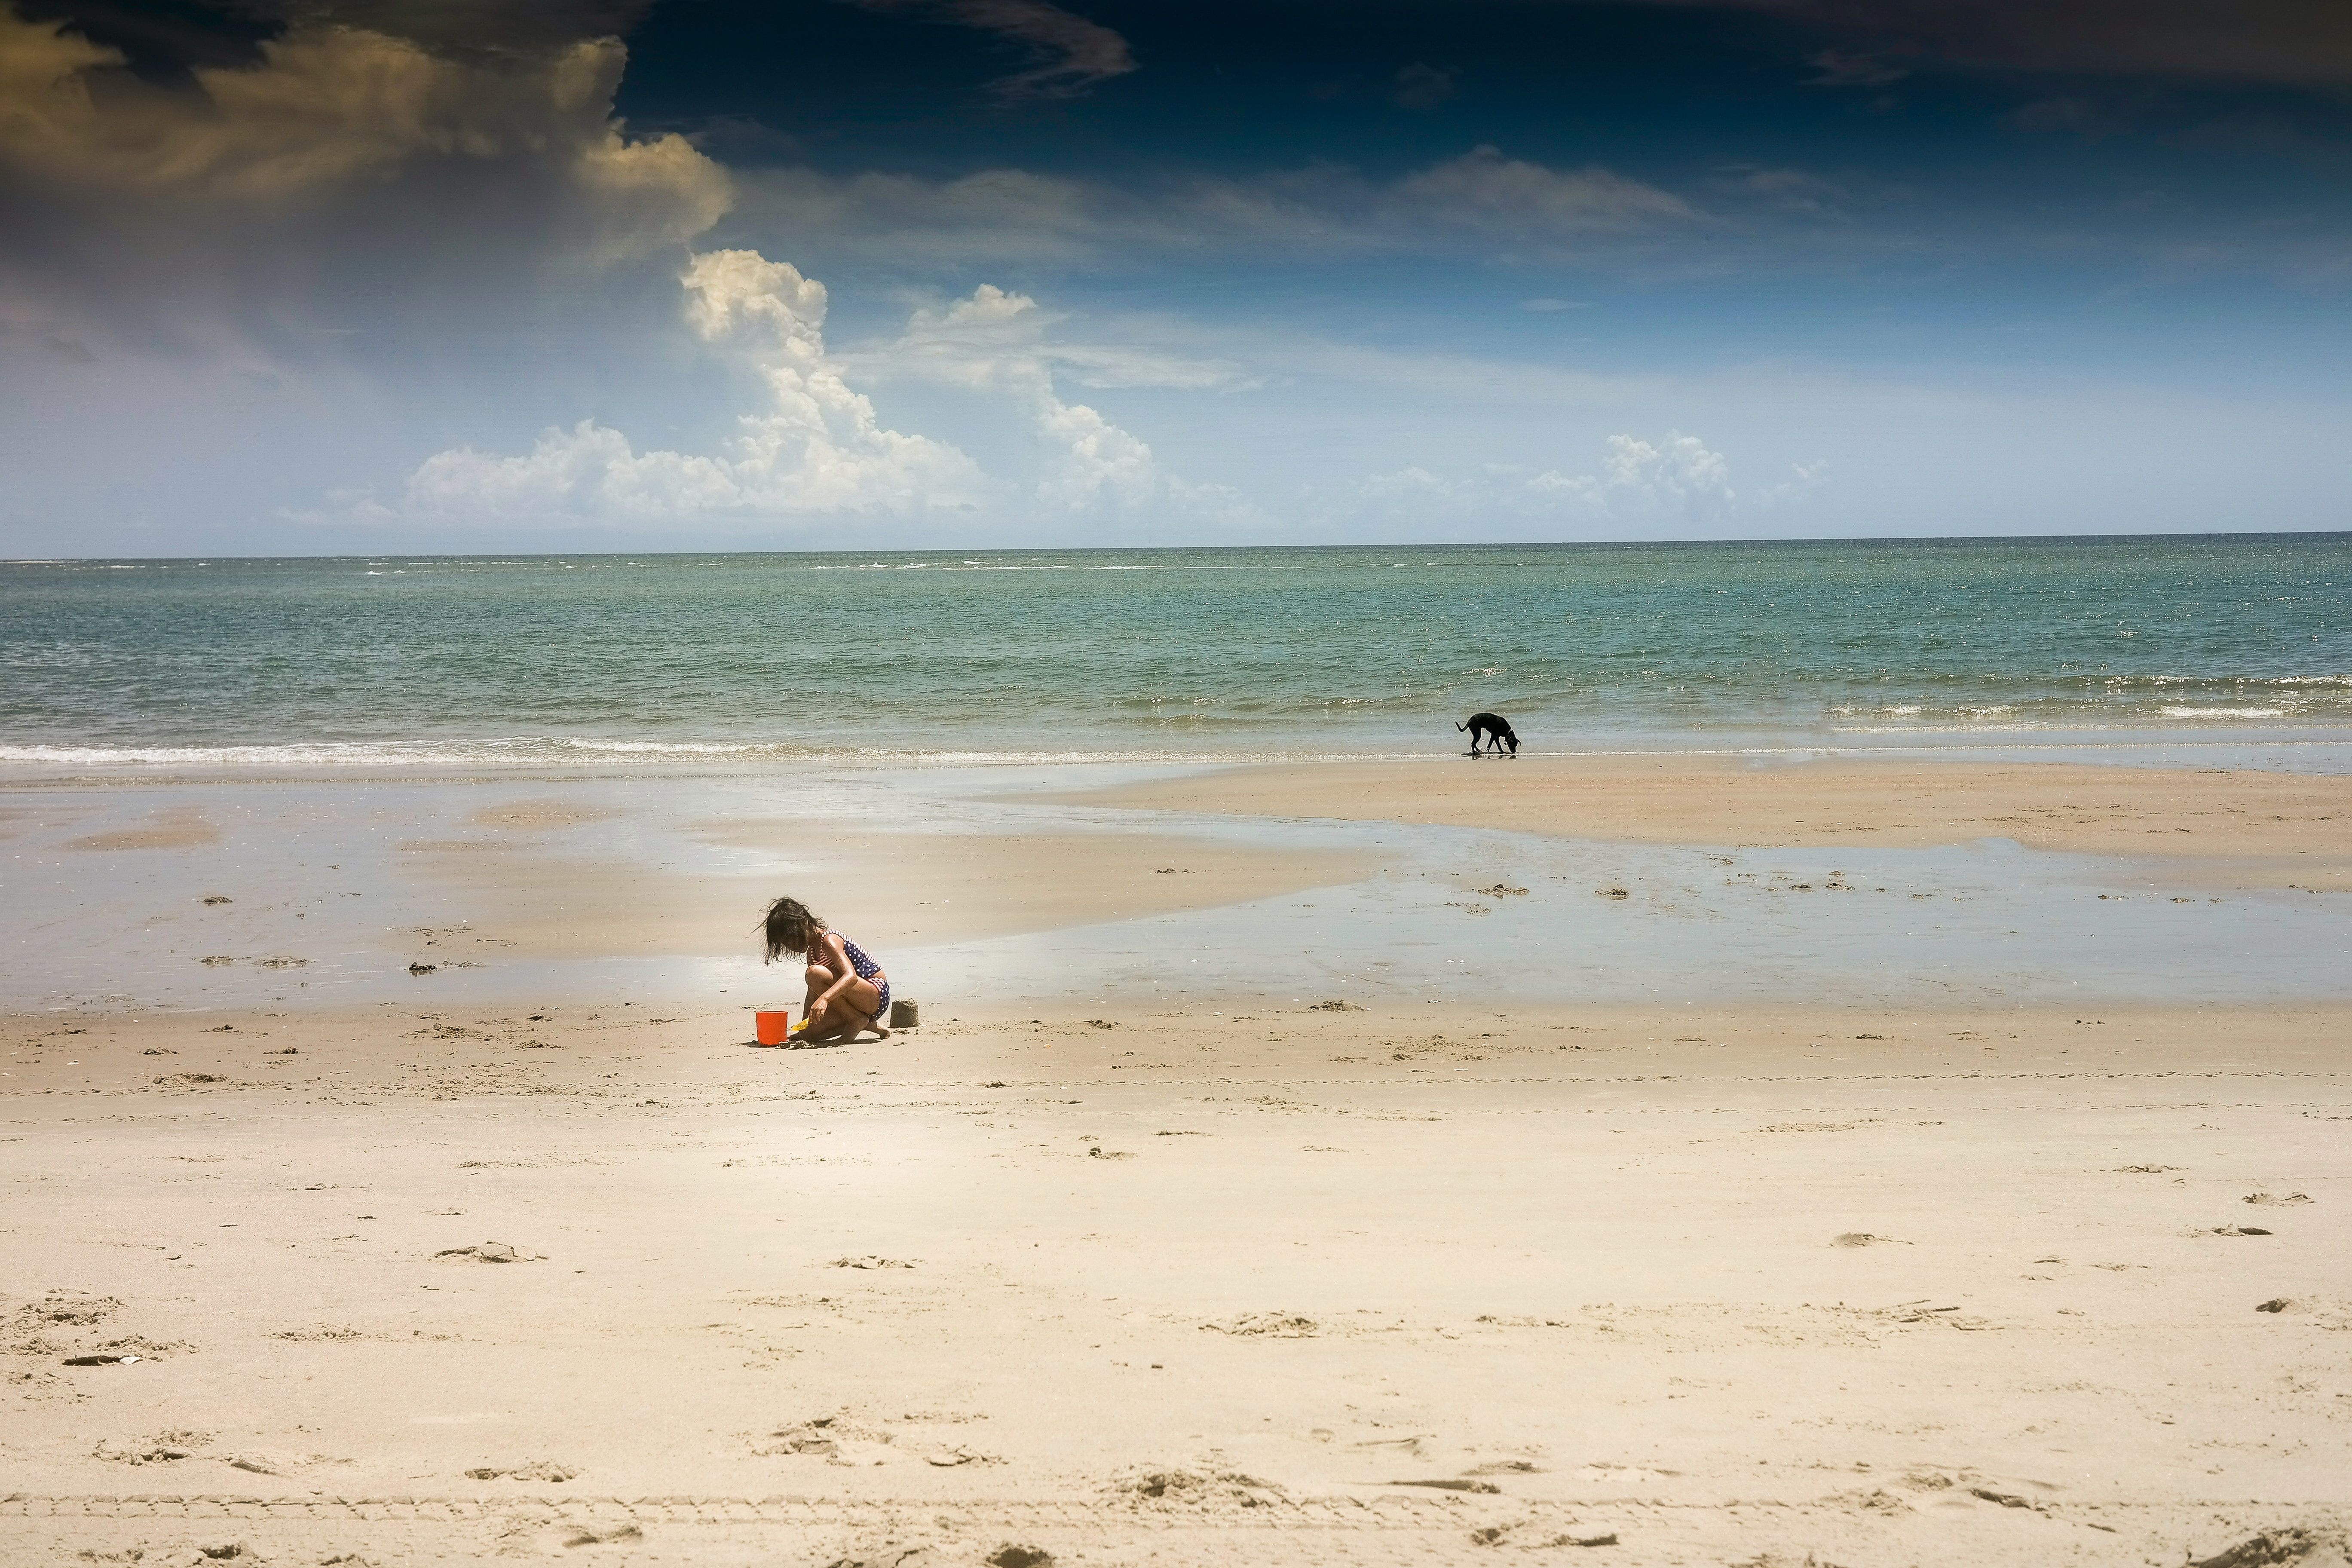 Child with a dog at the beach on Bald Head Island